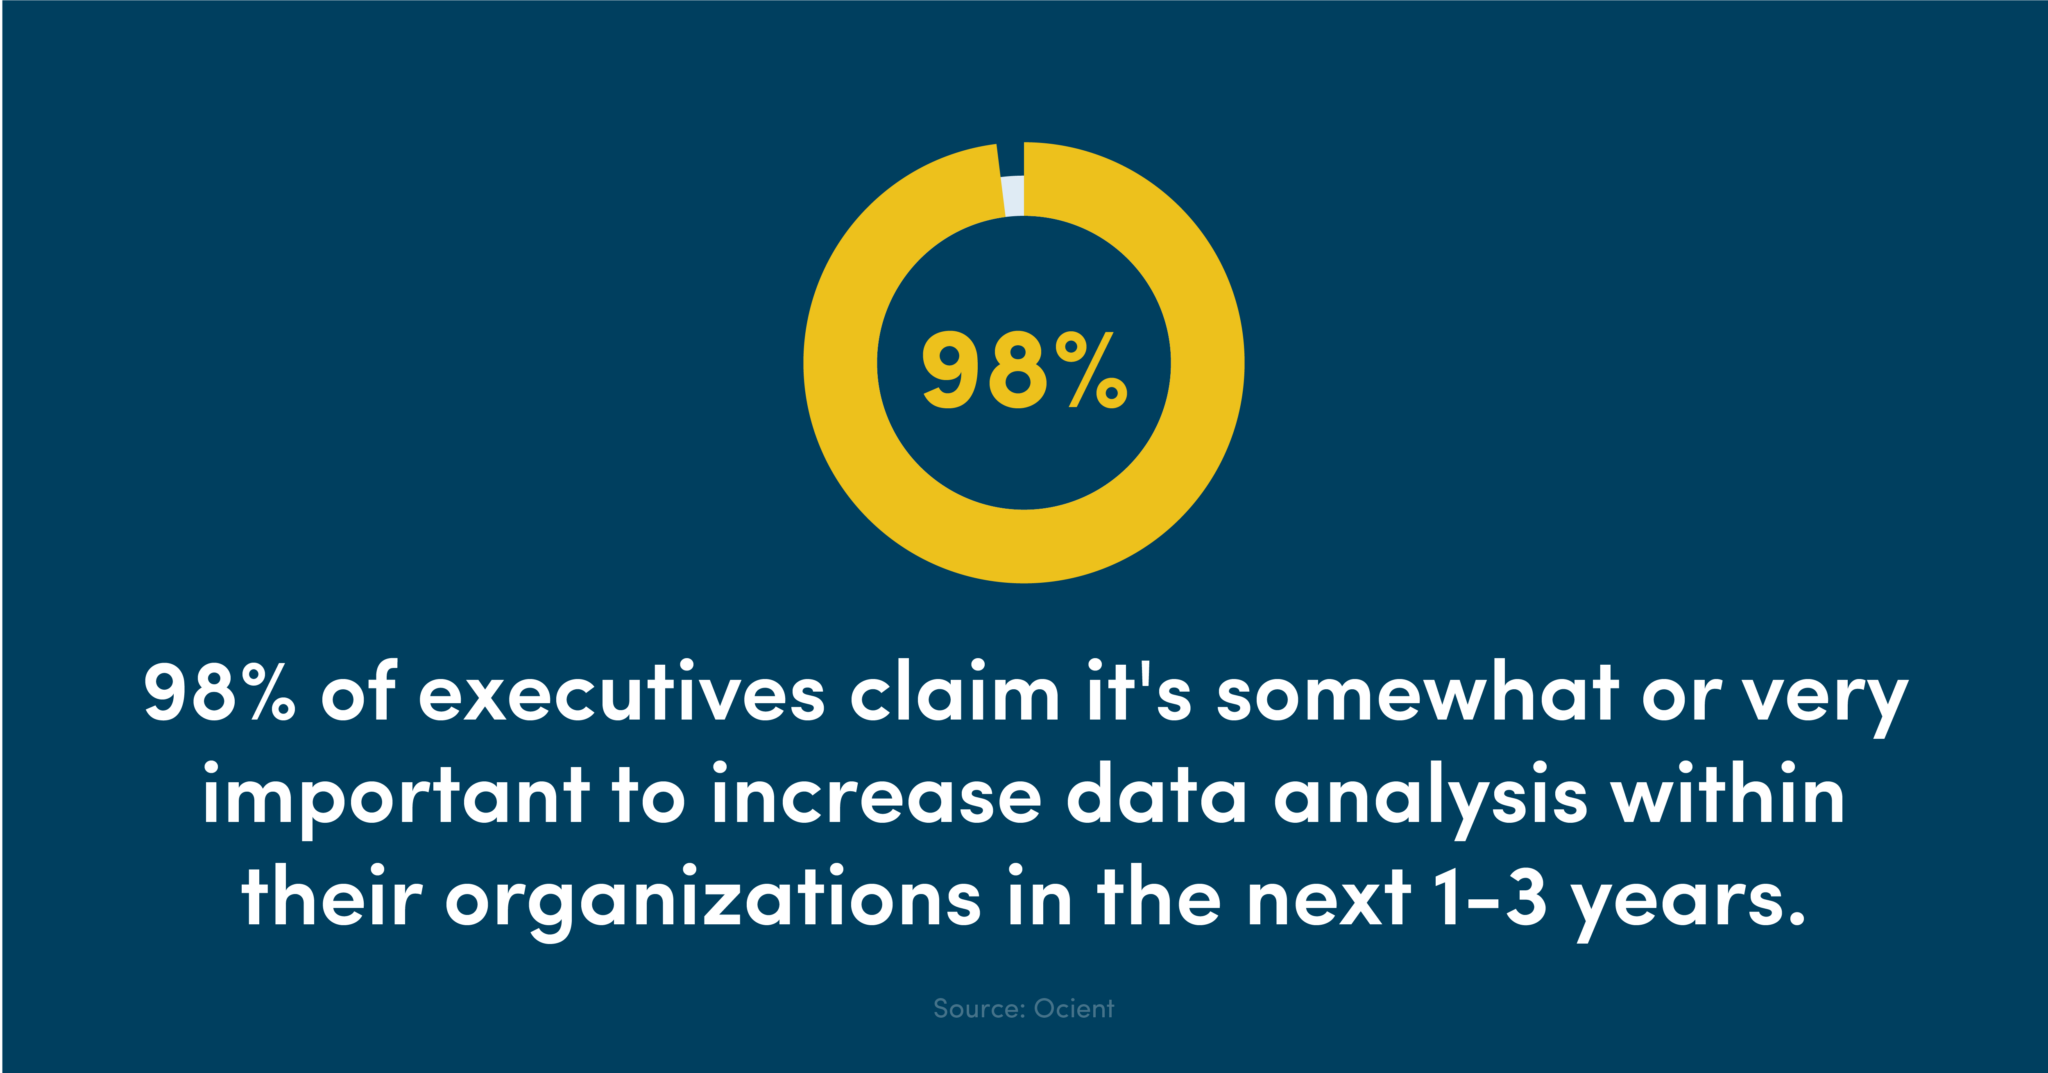 98% of executives claim it's somewhat or very important to increase data analysis within their organizations in the next 1-3 years.